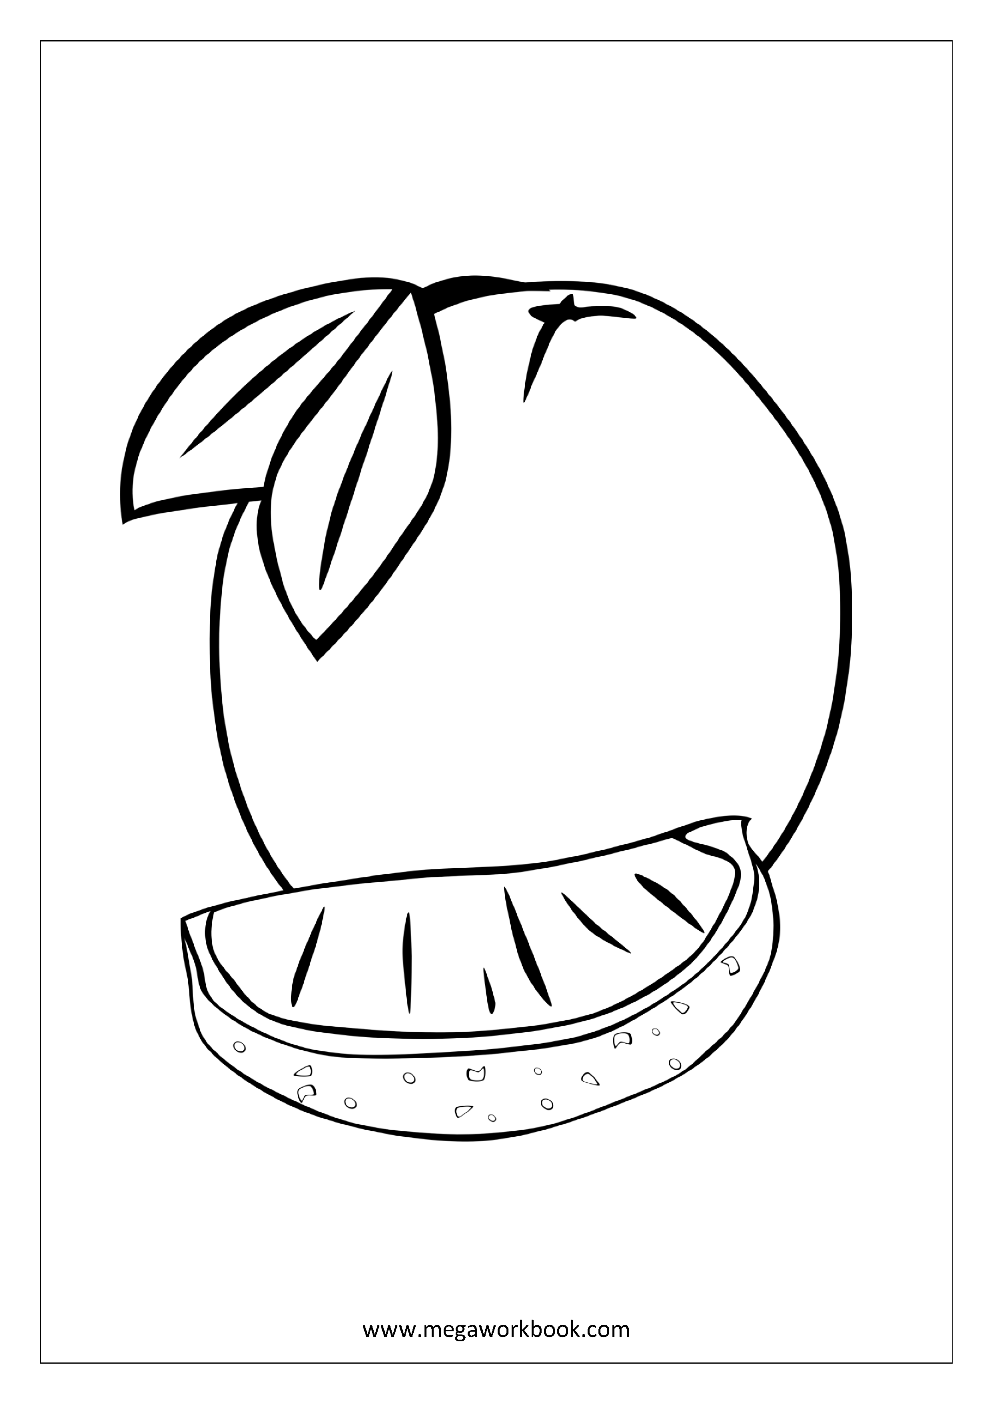 Fruit Coloring Pages Vegetable Coloring Pages Food Coloring Pages Free Printables Megaworkbook